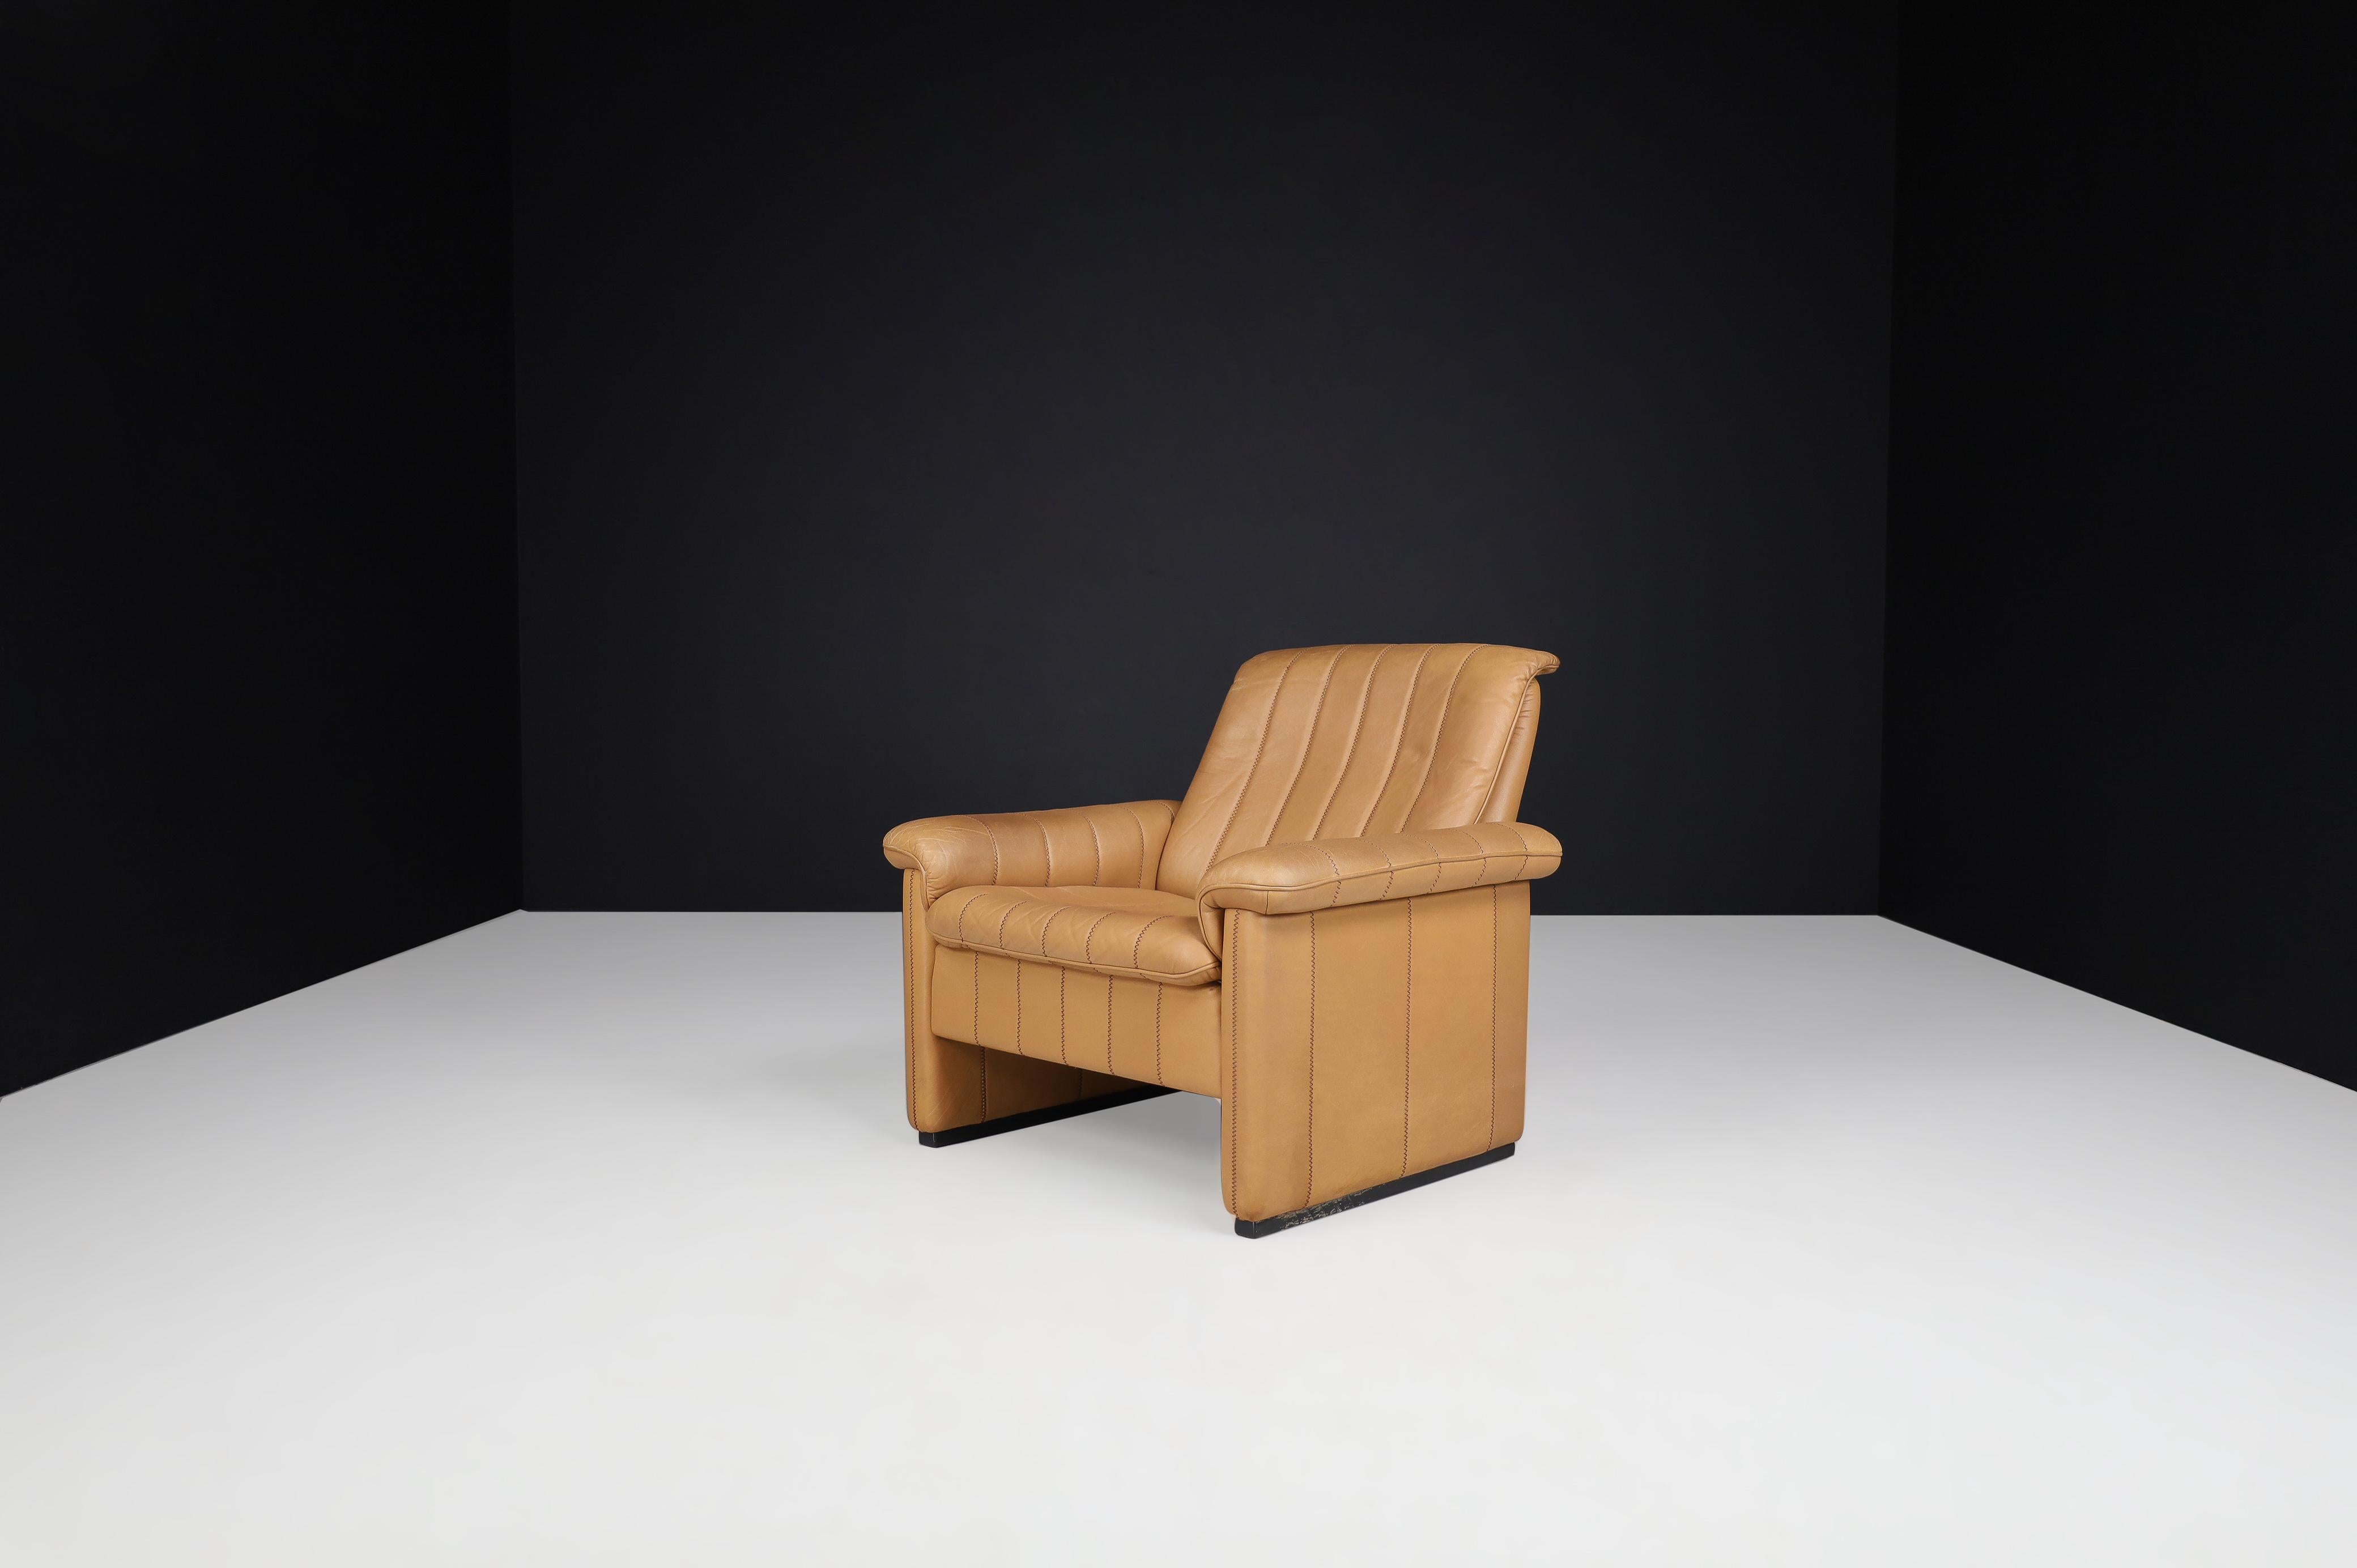 De Sede DS 83 lounge chair in leather, Switzerland 1970s

De Sede DS 83 lounge chair in leather, Switzerland 1970s This De Sede lounge chair ensures ultimate comfort and building quality with its solid wooden frame and thick hand-stitched leather